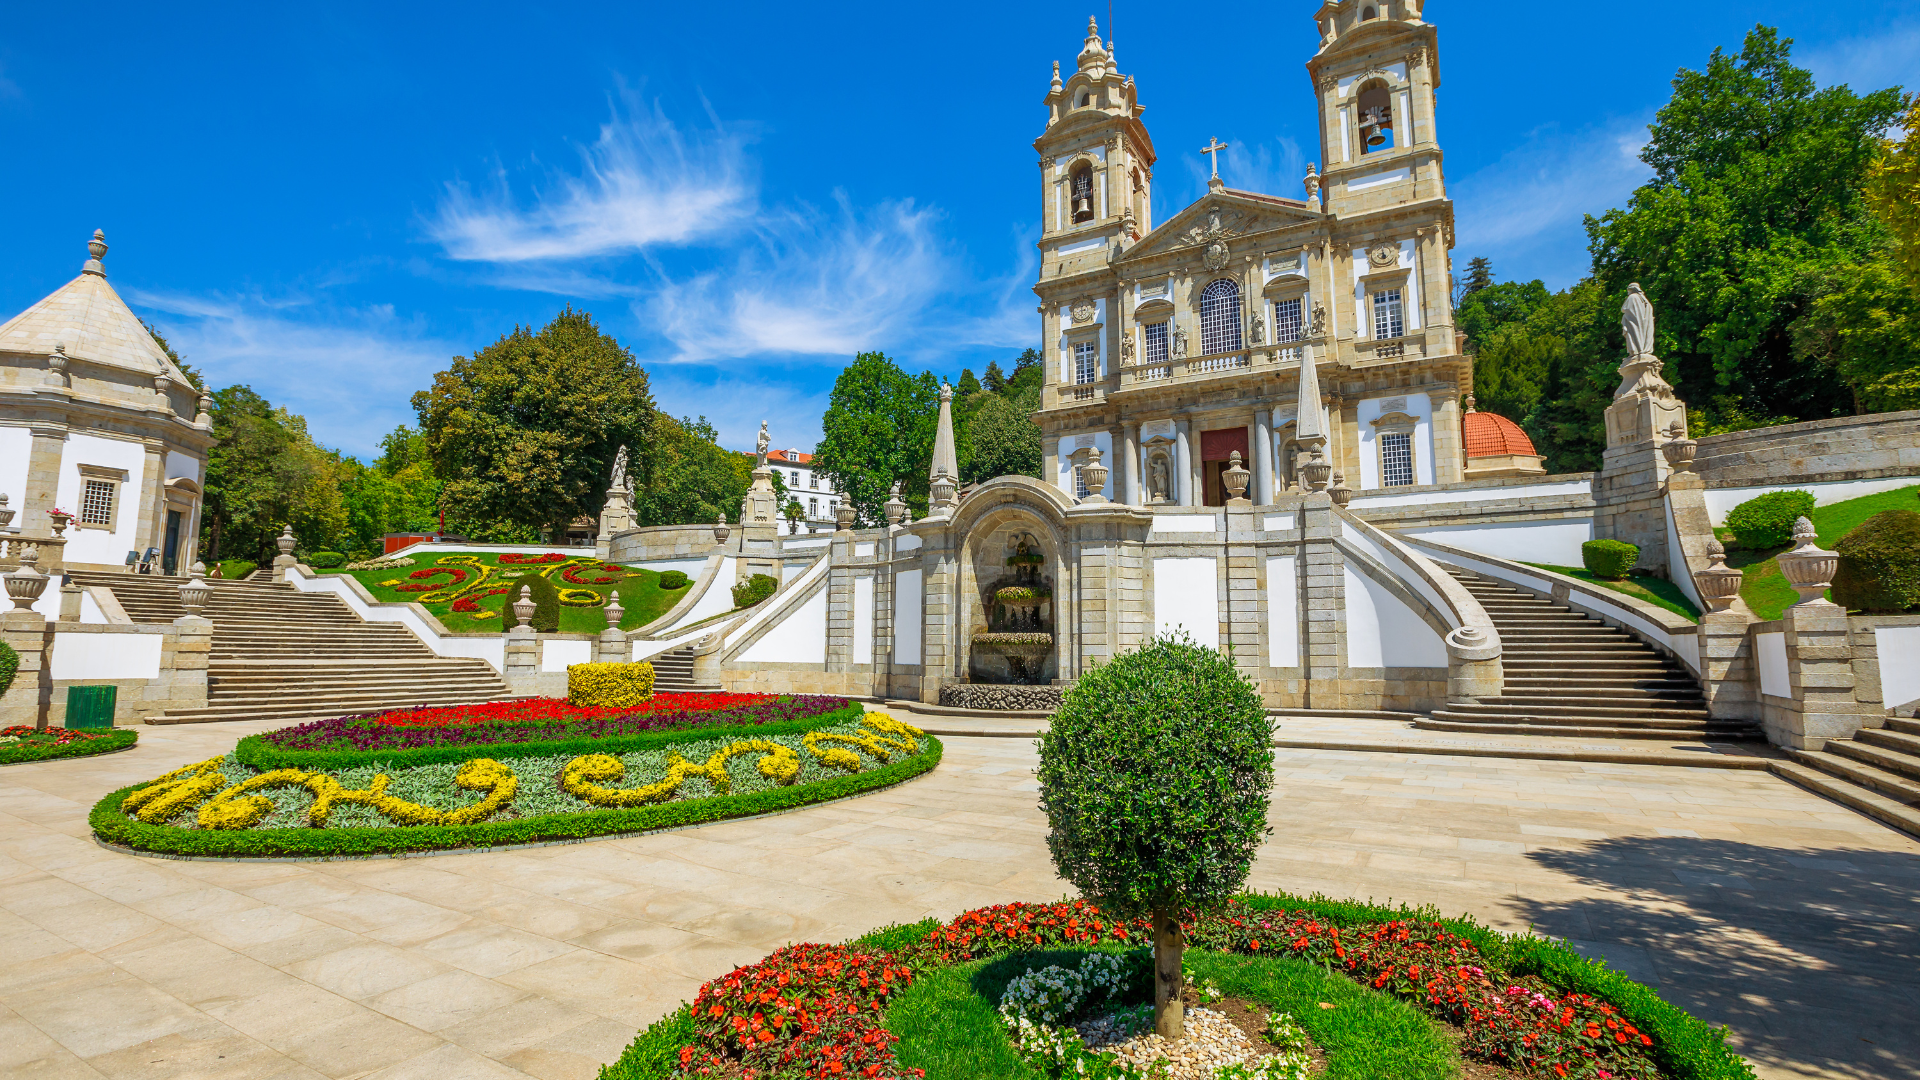 Braga, Portugal is one of the world's most walkable cities